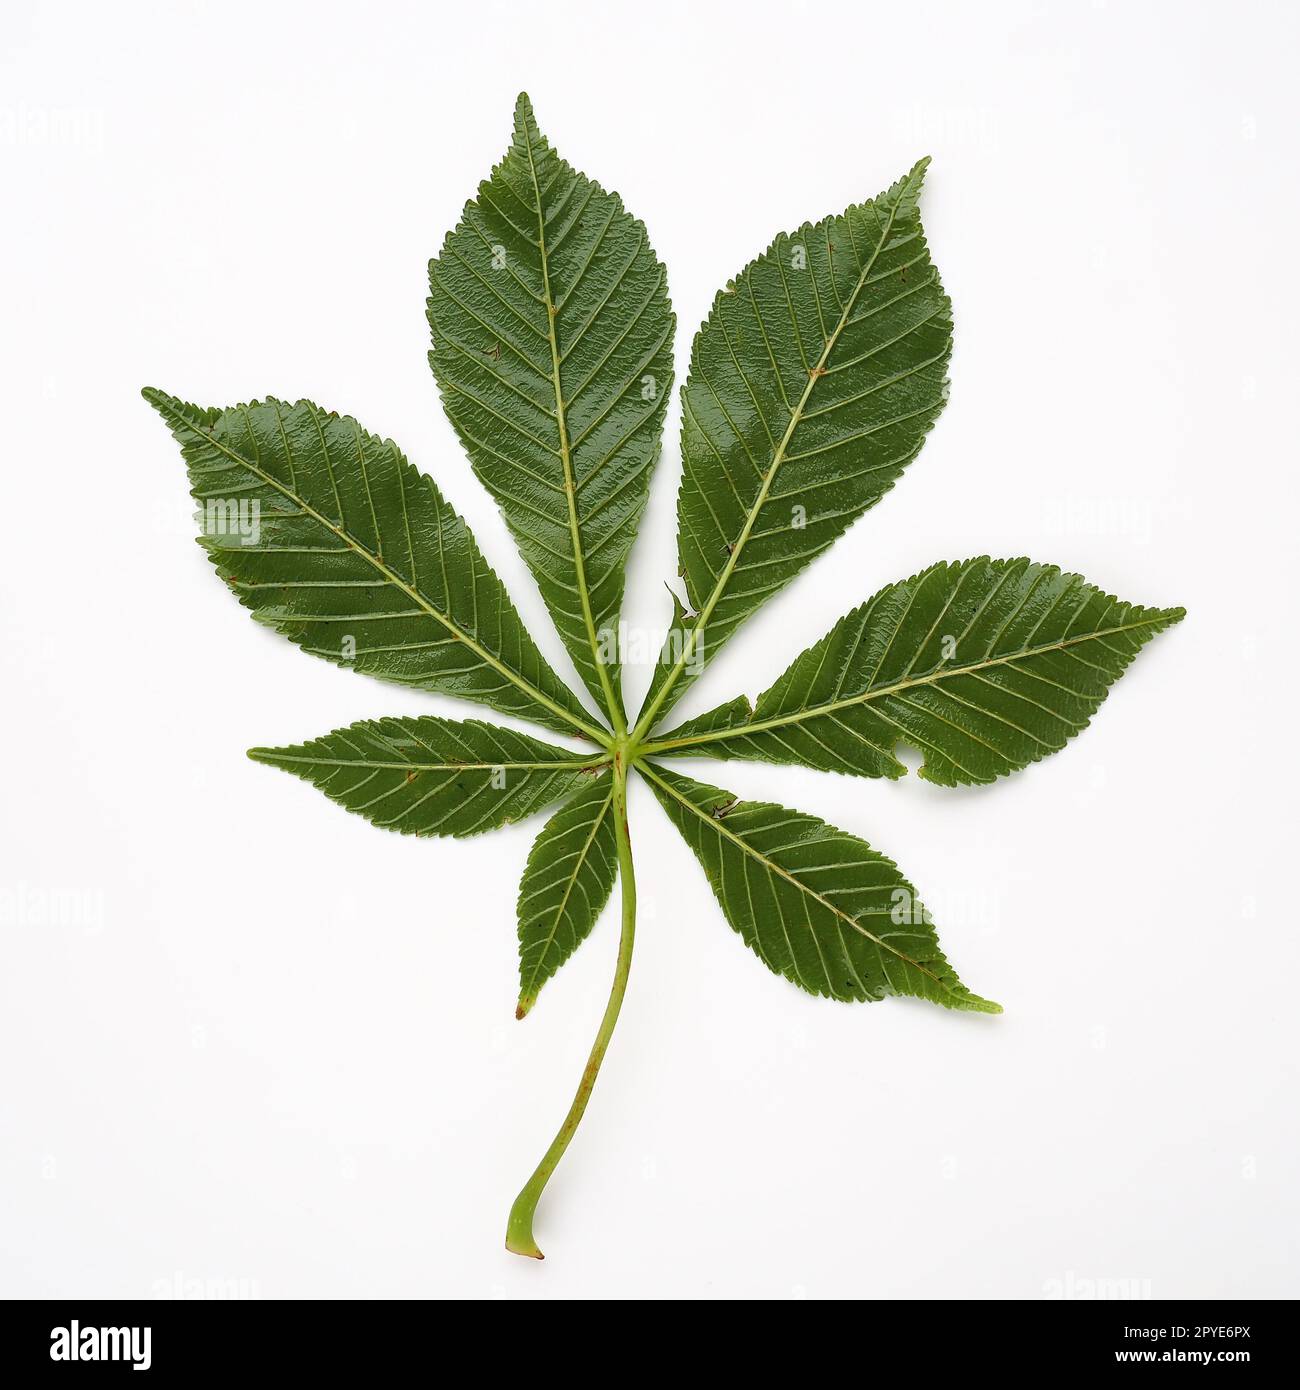 Chestnut leaf on a white background. The leaves are large, 7 - palmate, opposite, with long petioles. Horse chestnut, acorn, esculus Aesculus, a genus of plants in the Sapindaceae family Sapindaceae. Stock Photo